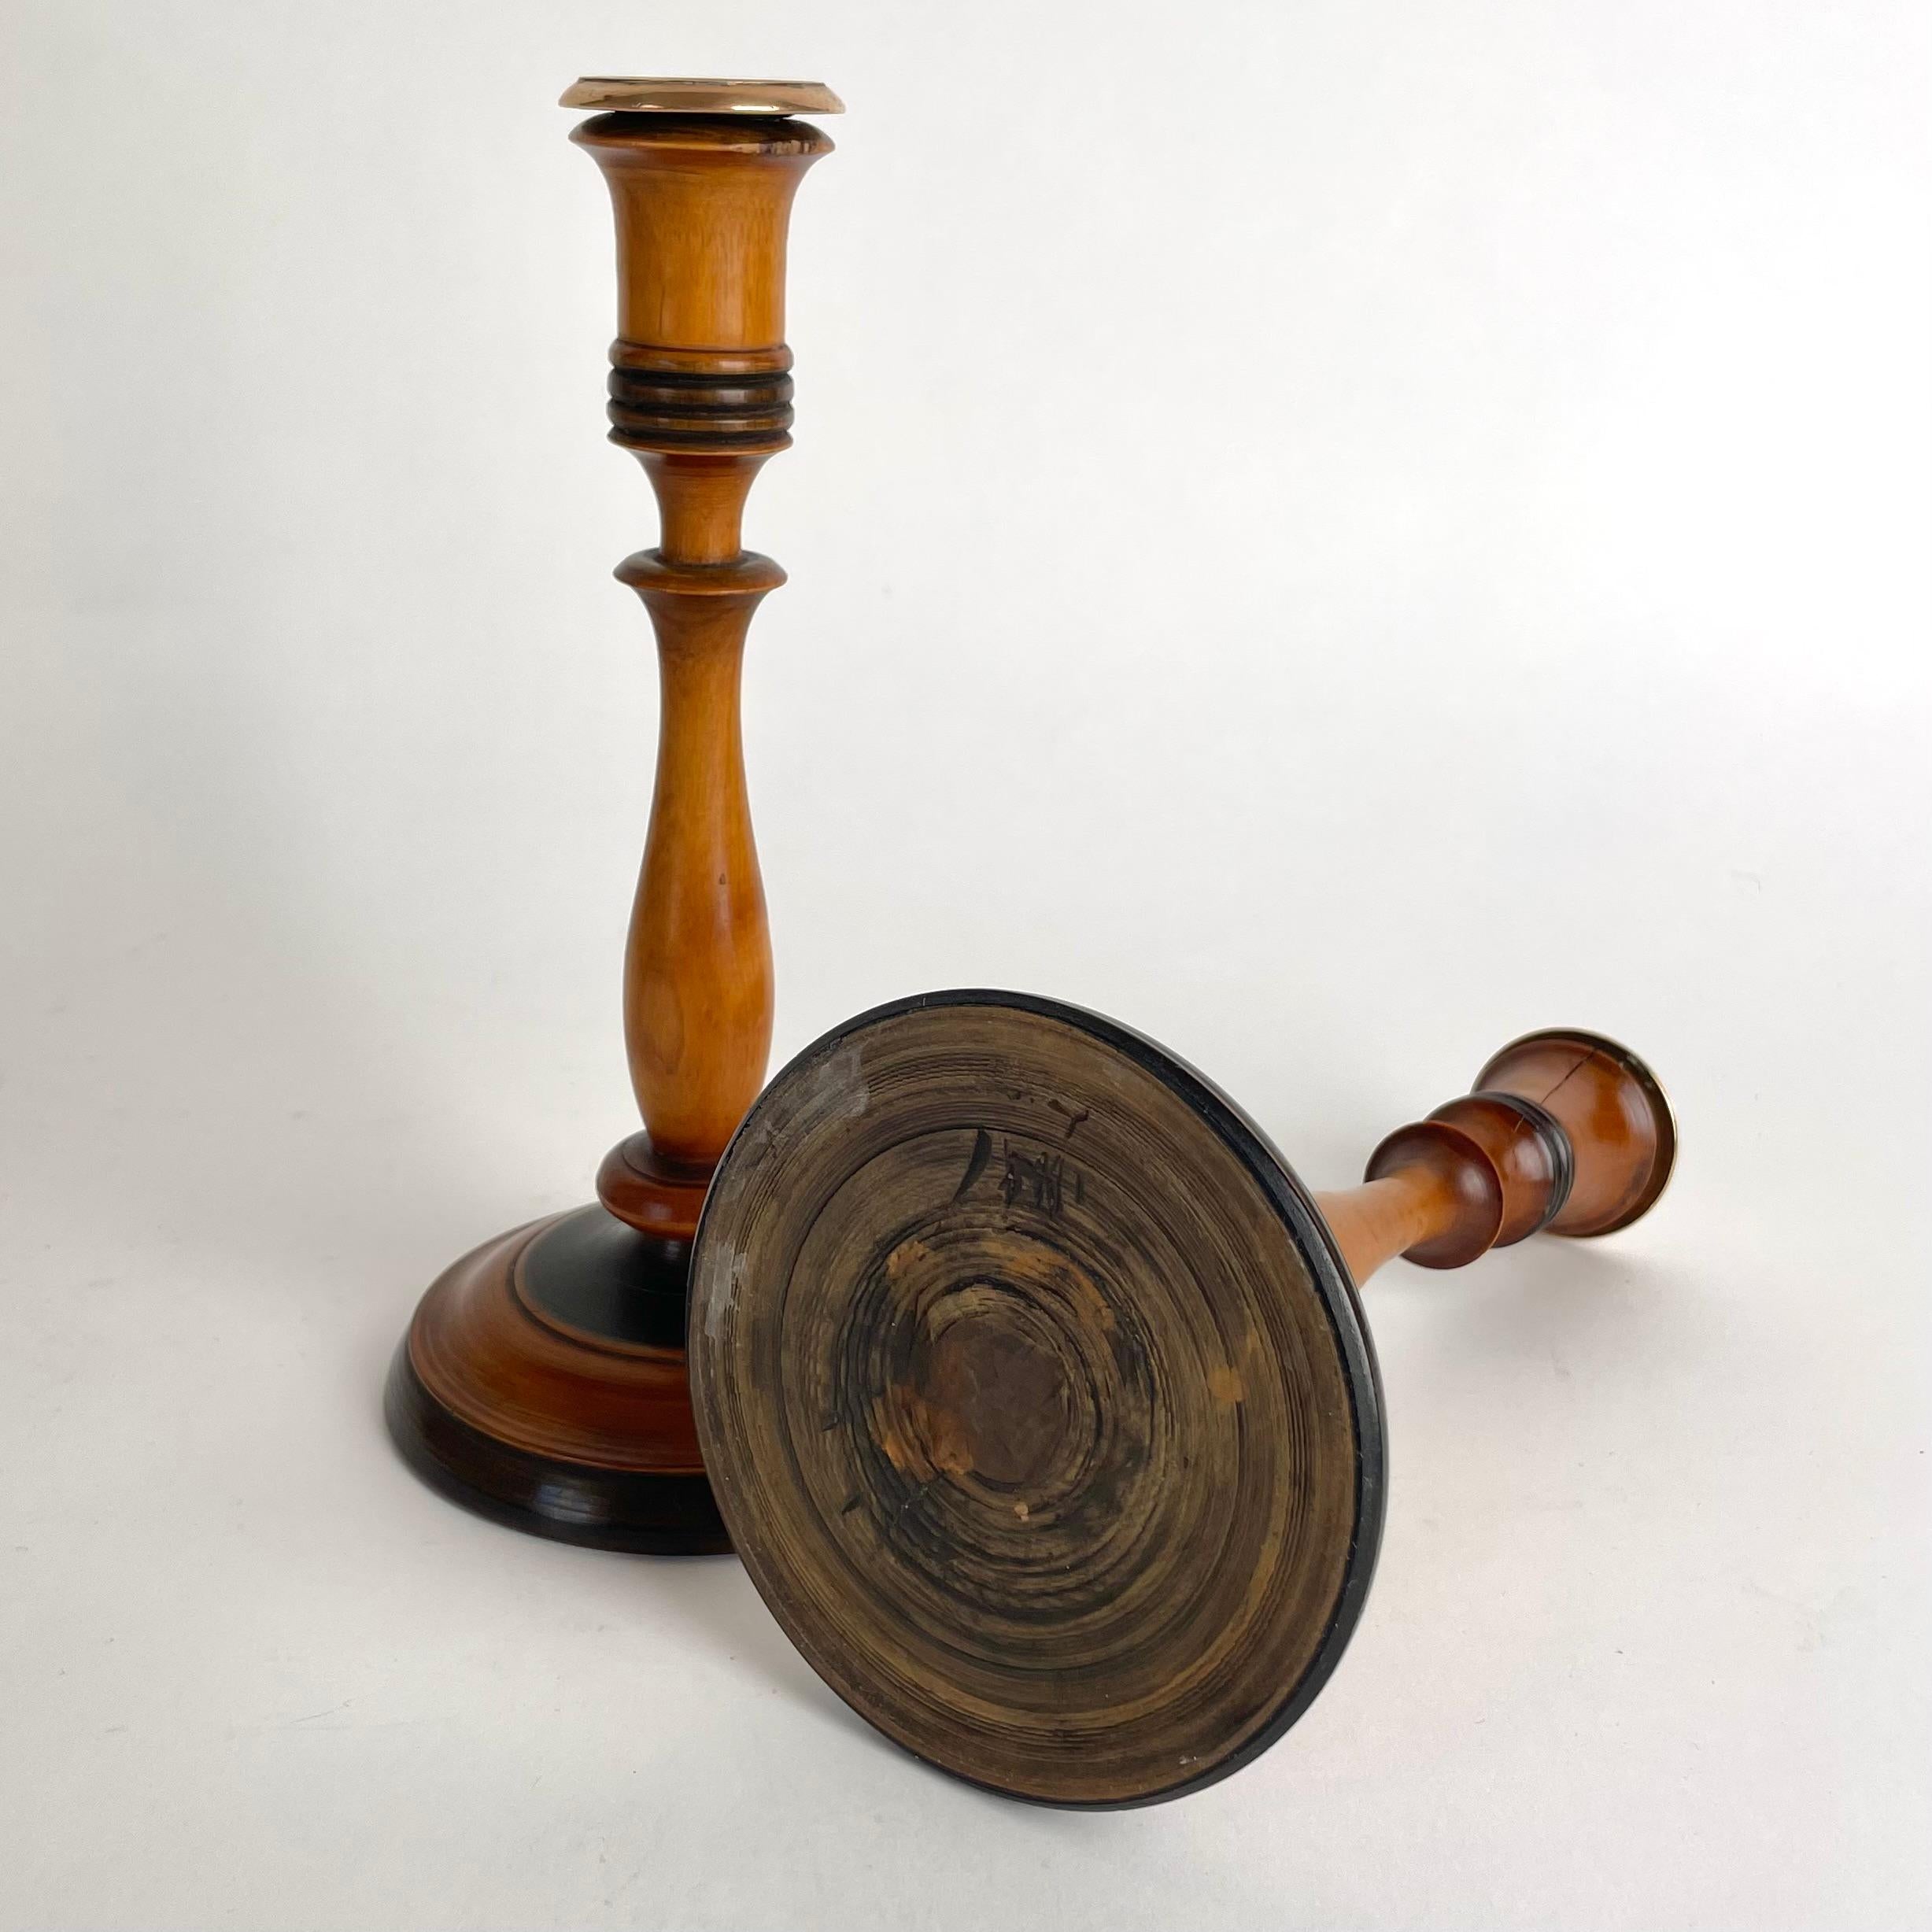 Pair of Birch Candlesticks in Swedish Karl-Johan from the 1820s-1830s For Sale 3